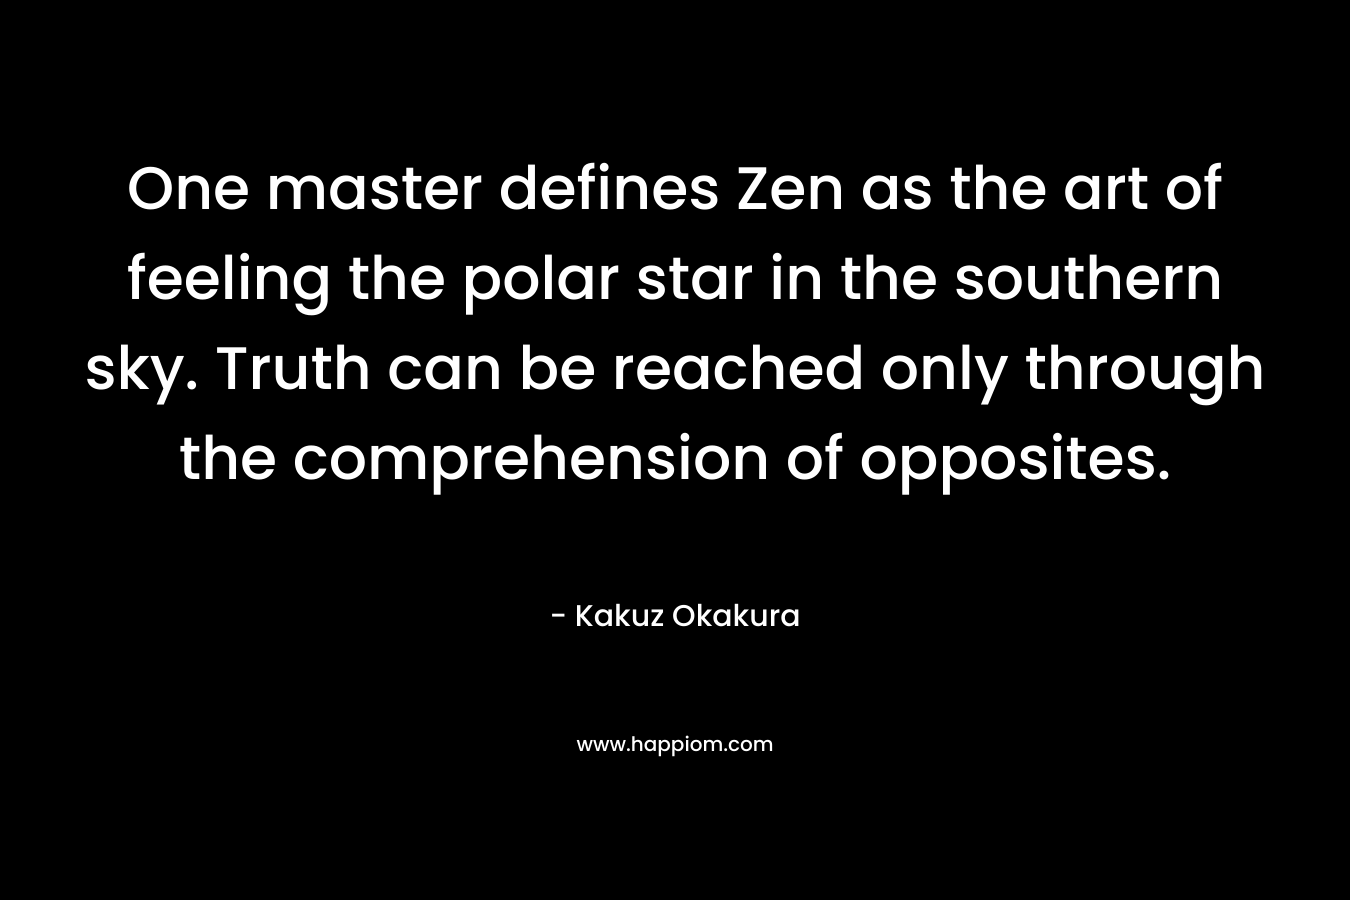 One master defines Zen as the art of feeling the polar star in the southern sky. Truth can be reached only through the comprehension of opposites. – Kakuz Okakura